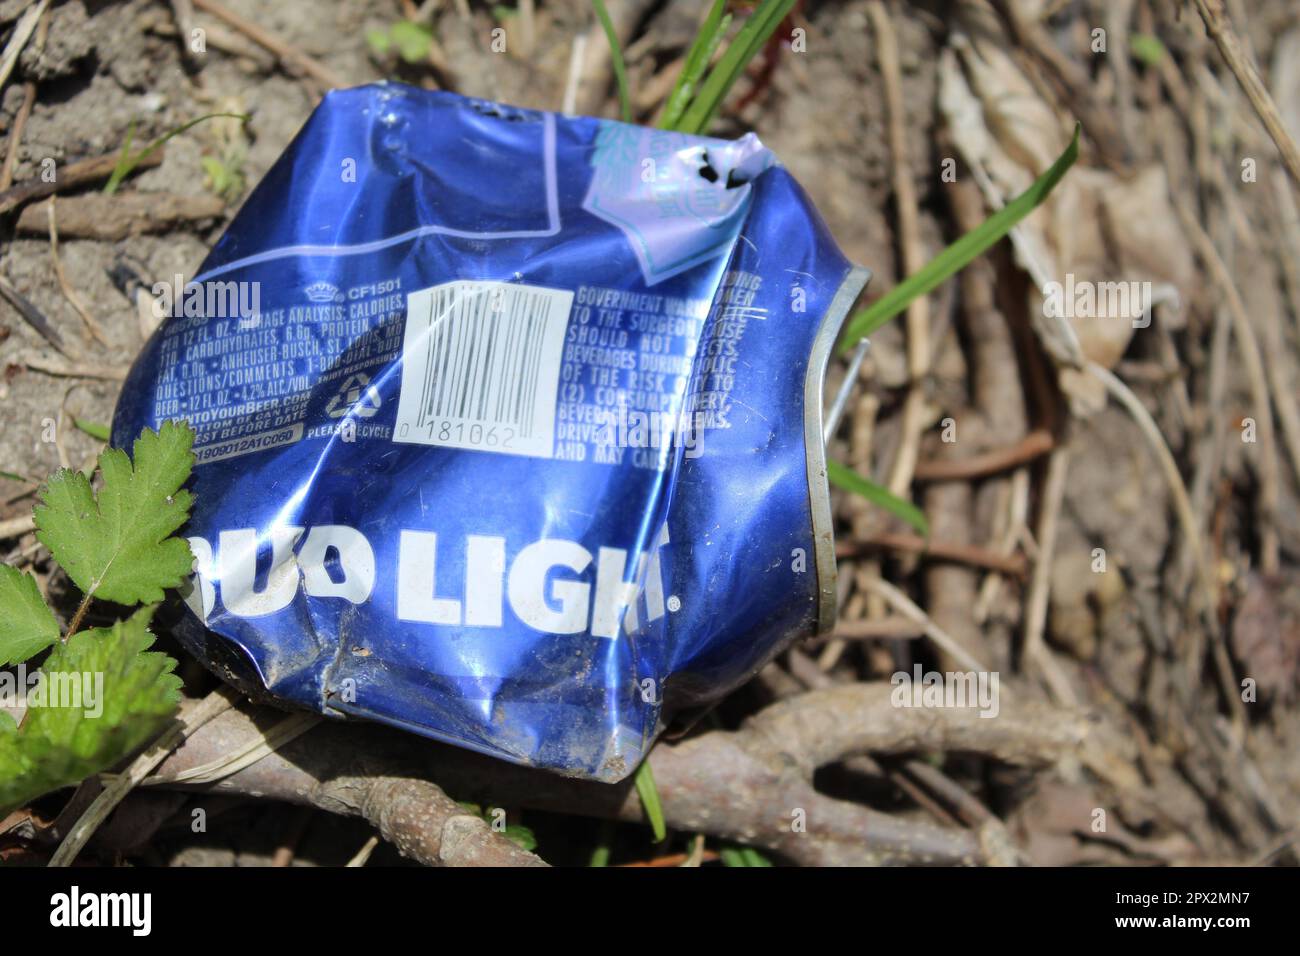 Crushed Bud Light beer can with vegetation at Camp Ground Road Woods in Des Plaines, Illinois Stock Photo